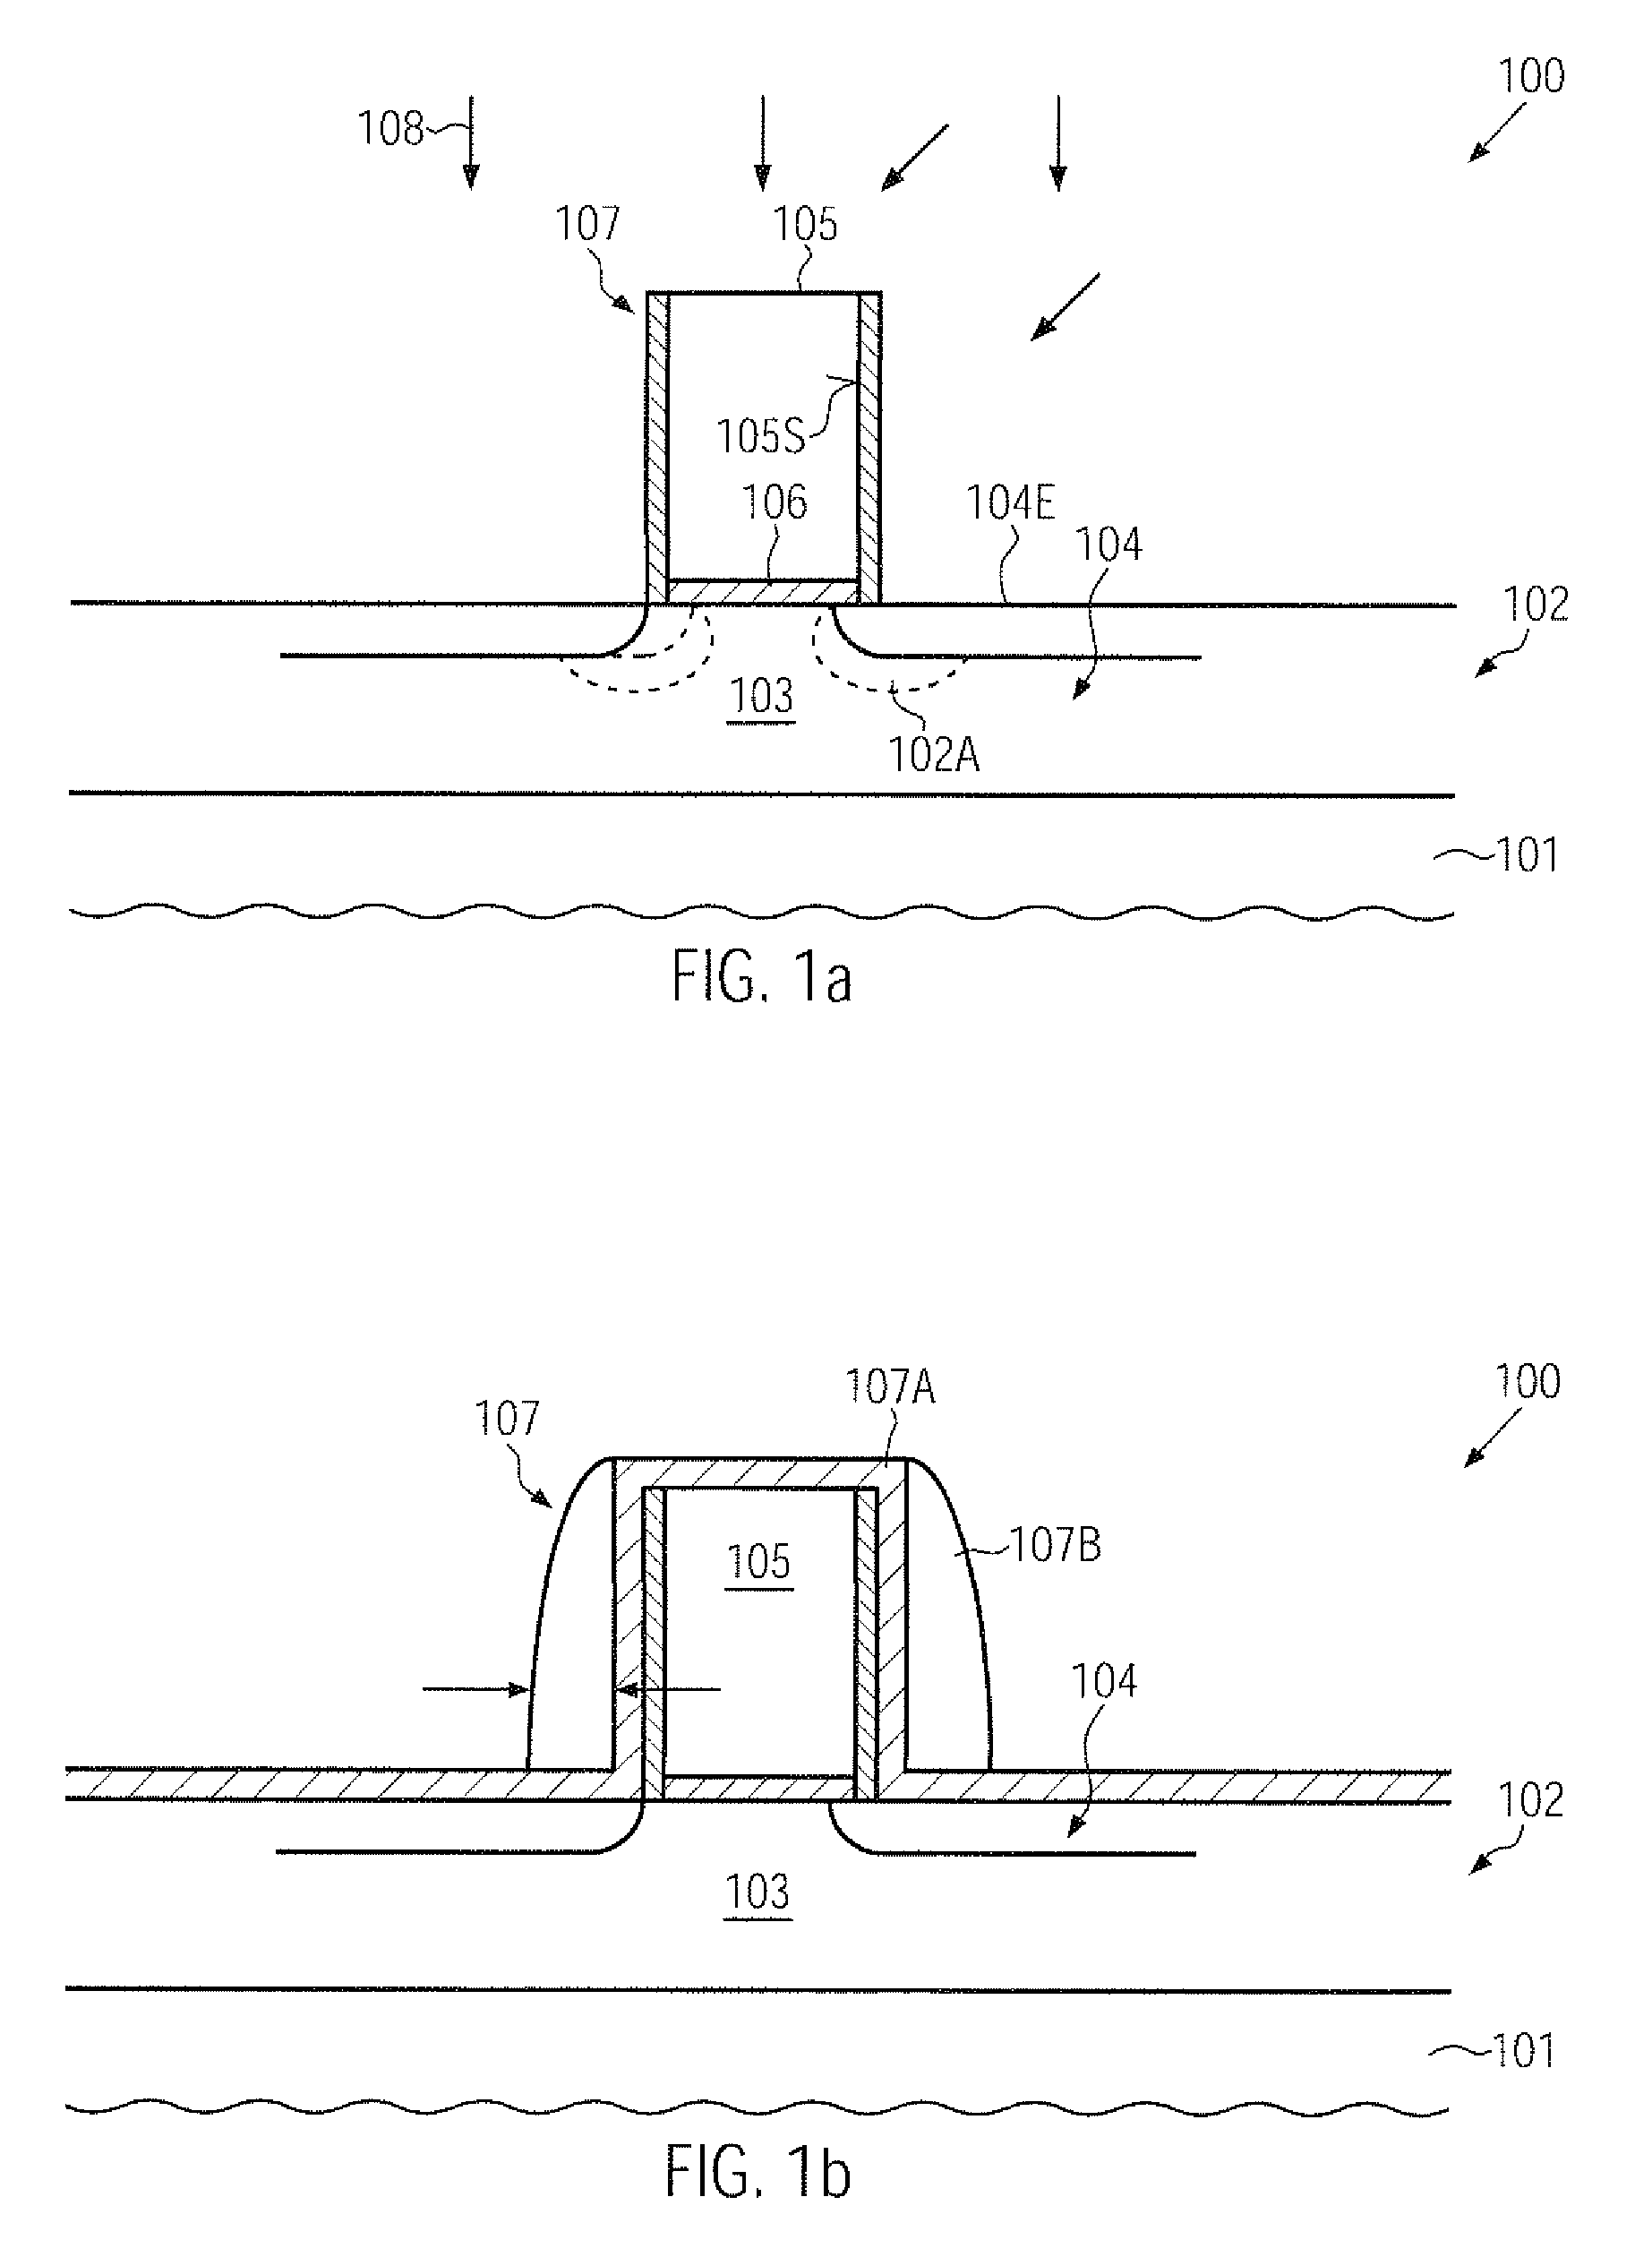 Technique for enhancing dopant profile and channel conductivity by millisecond anneal processes